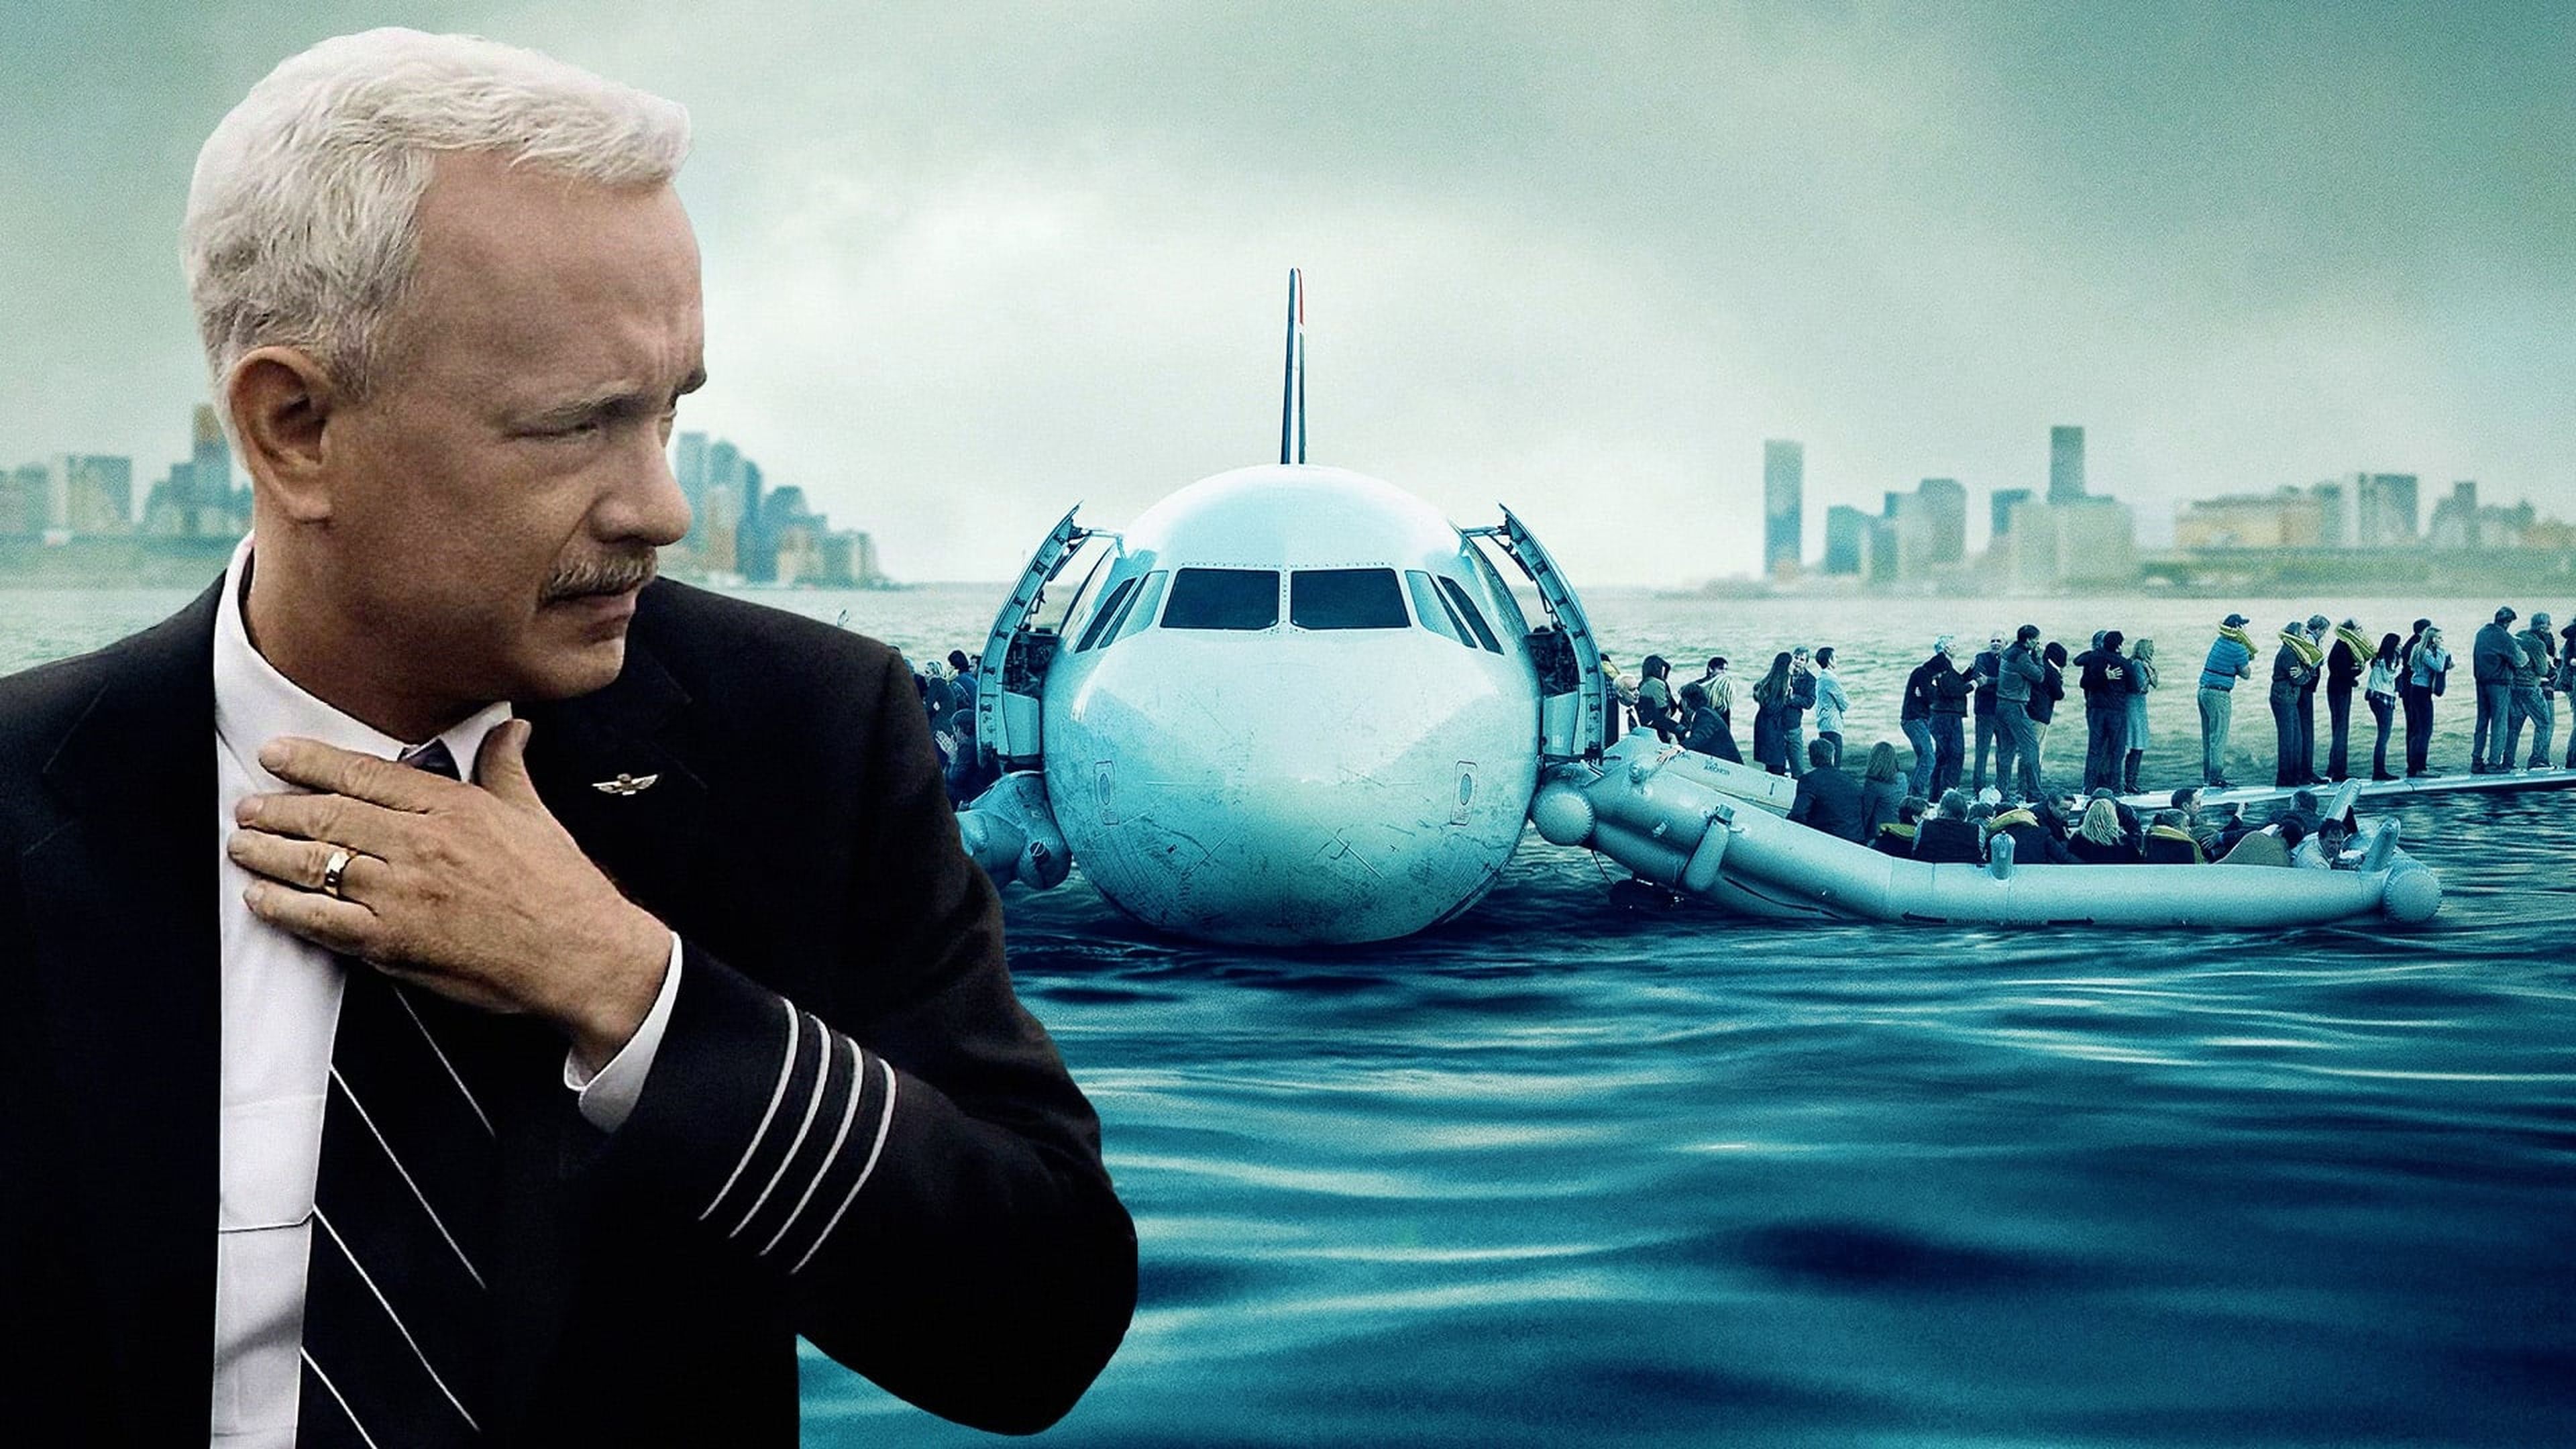 7 films about missing planes or air tragedies that are very worthwhile